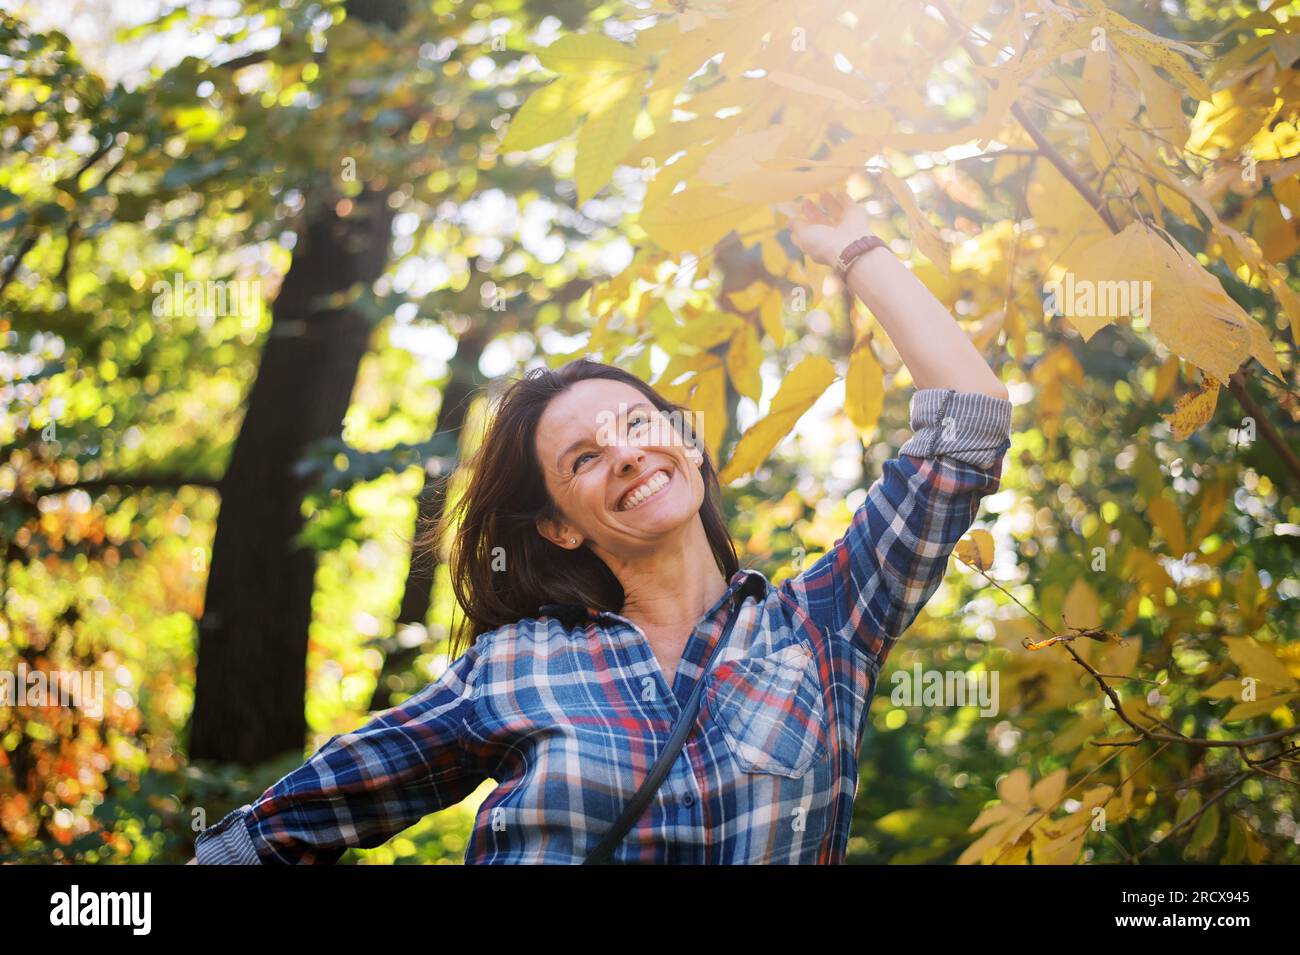 Smiling middle-aged brunette woman admiring yellow autumn leaves Stock Photo